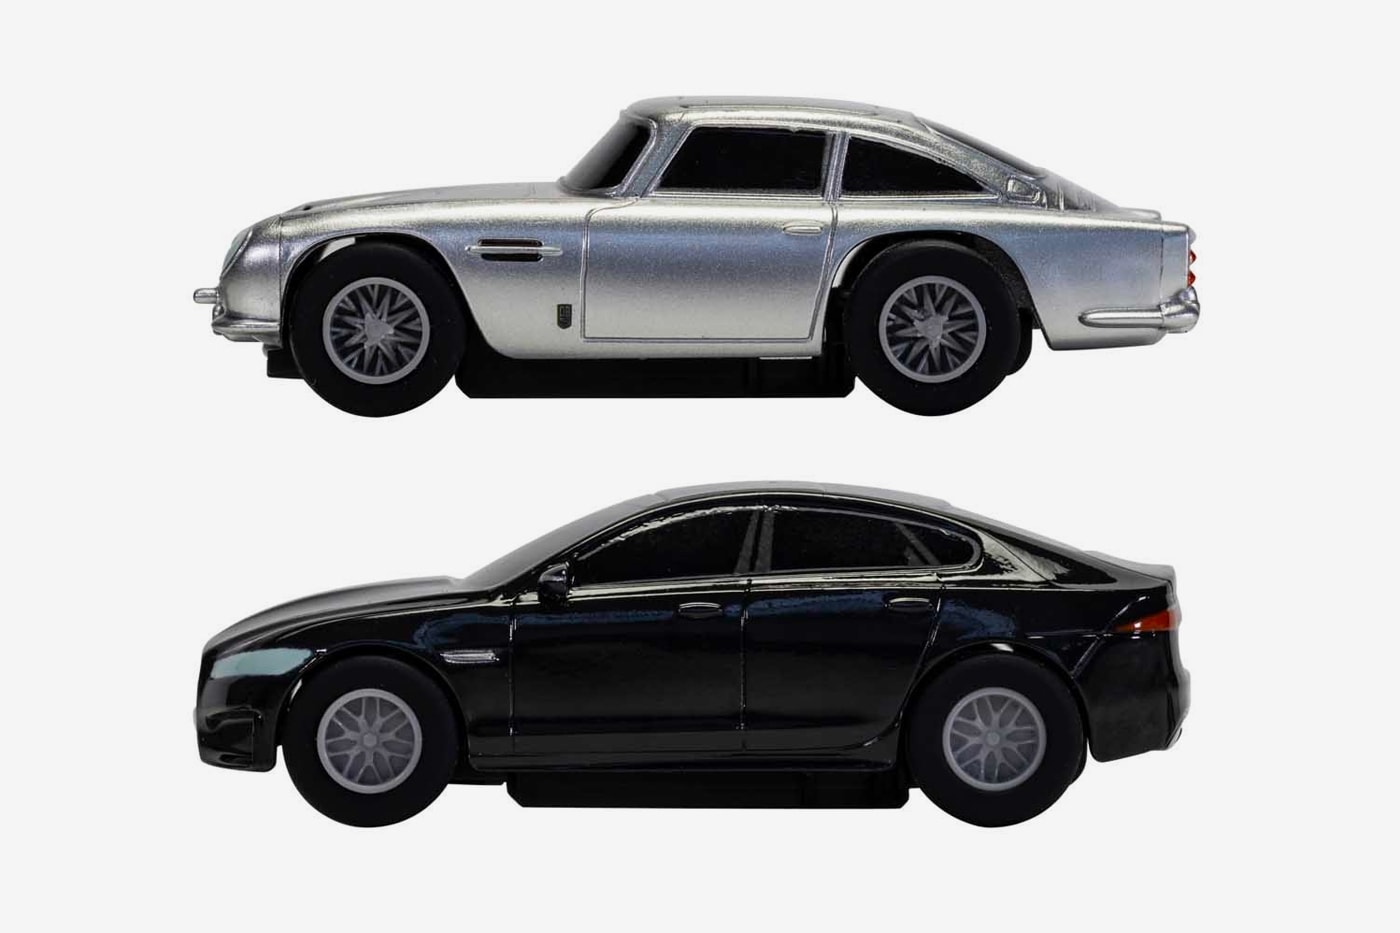 Race the Aston Martin DB5 and Jaguar XF in Scalextric's 'No Time to Die' Slot Car Set  slot car toy racing 